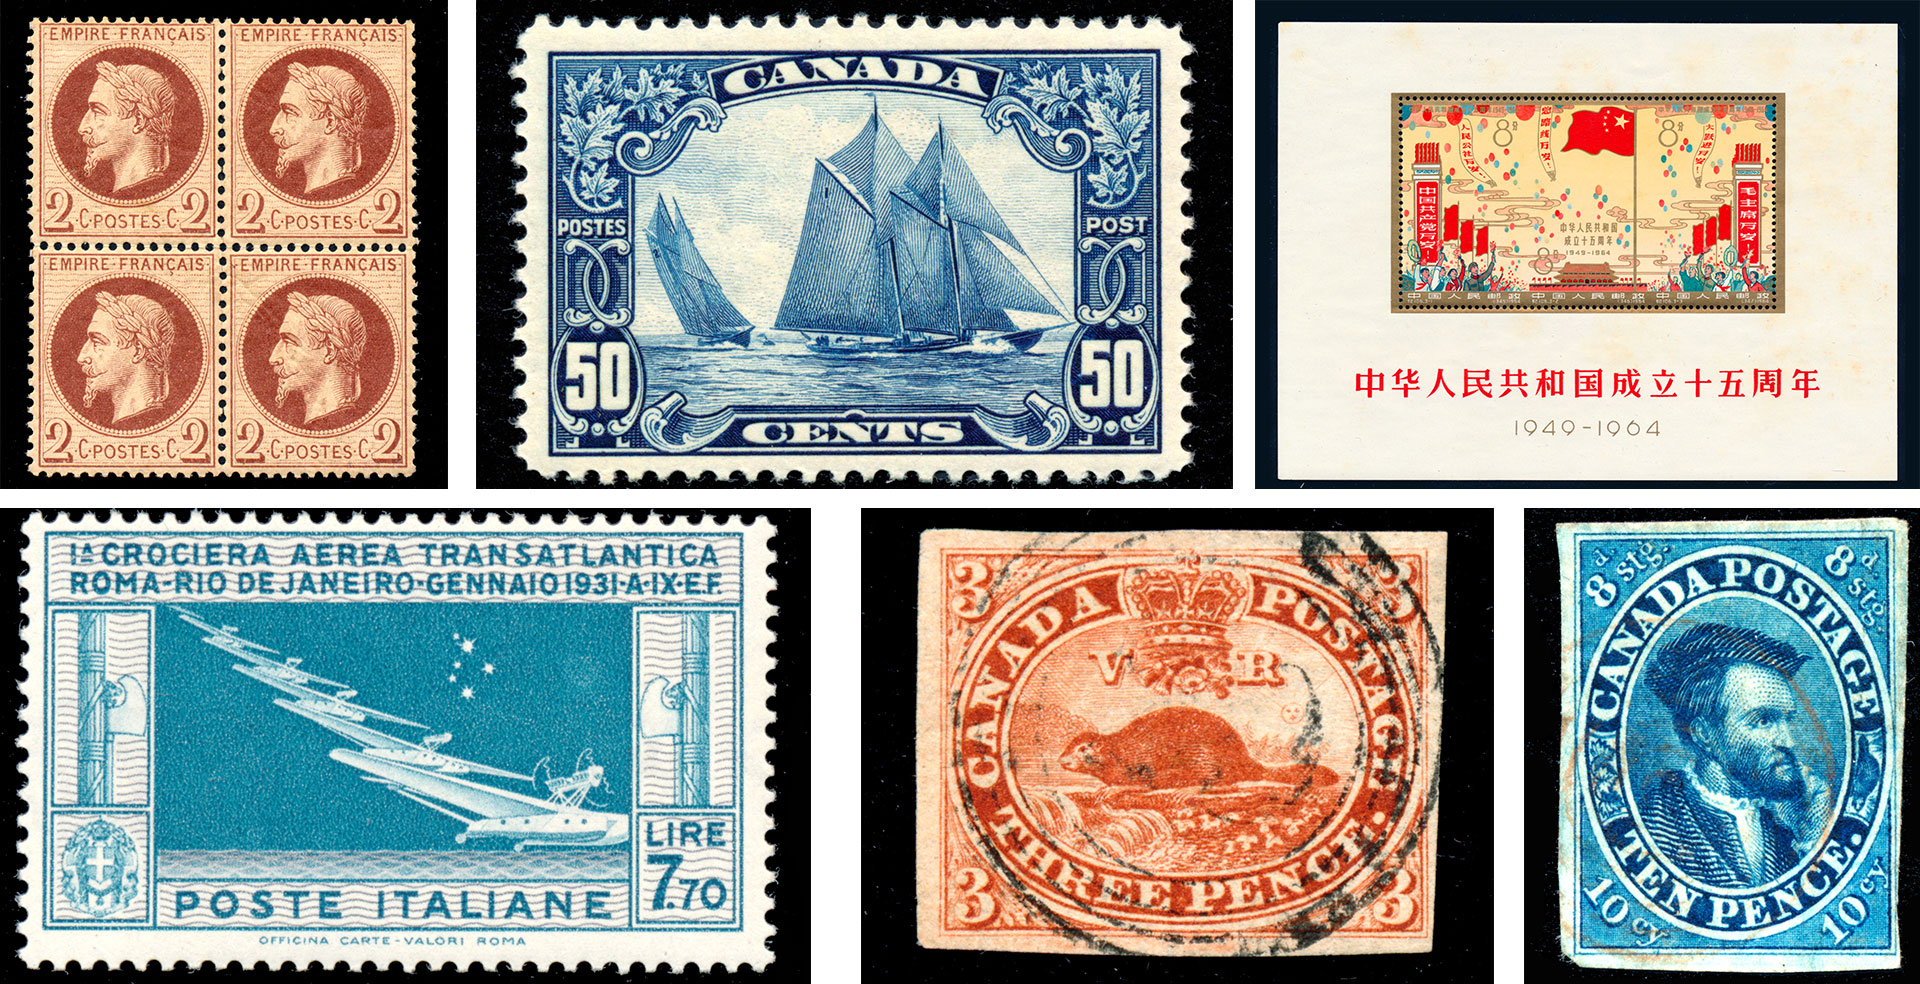 Collectible Stamps for sale in Montreal, Quebec, Facebook Marketplace